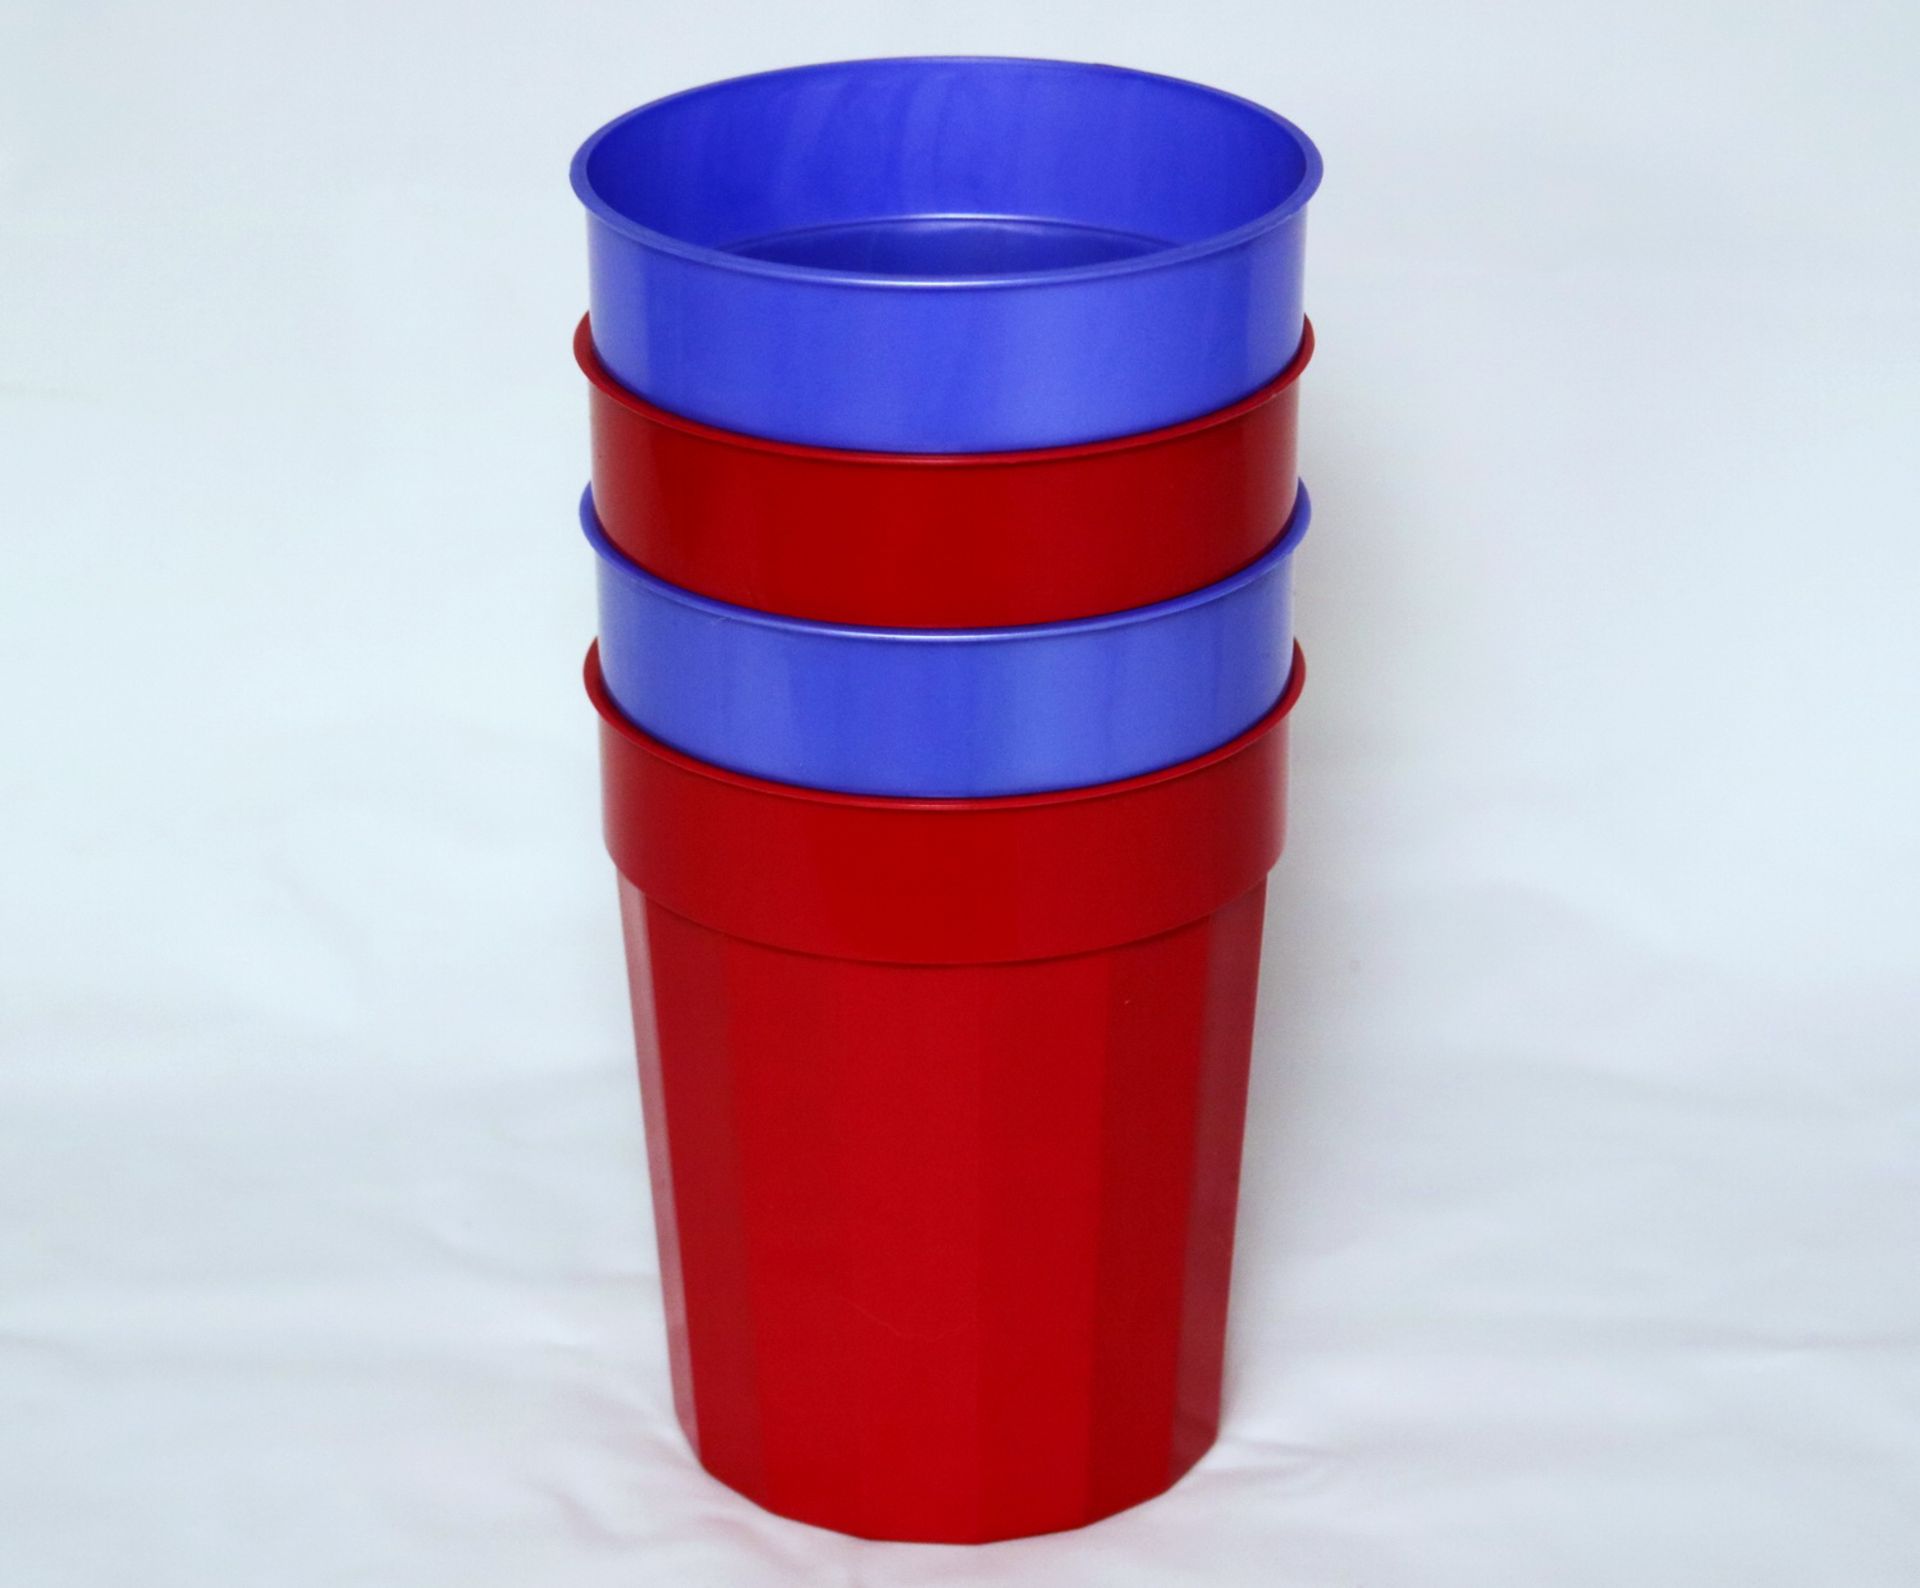 22oz Drink Cup Mold - Image 12 of 13